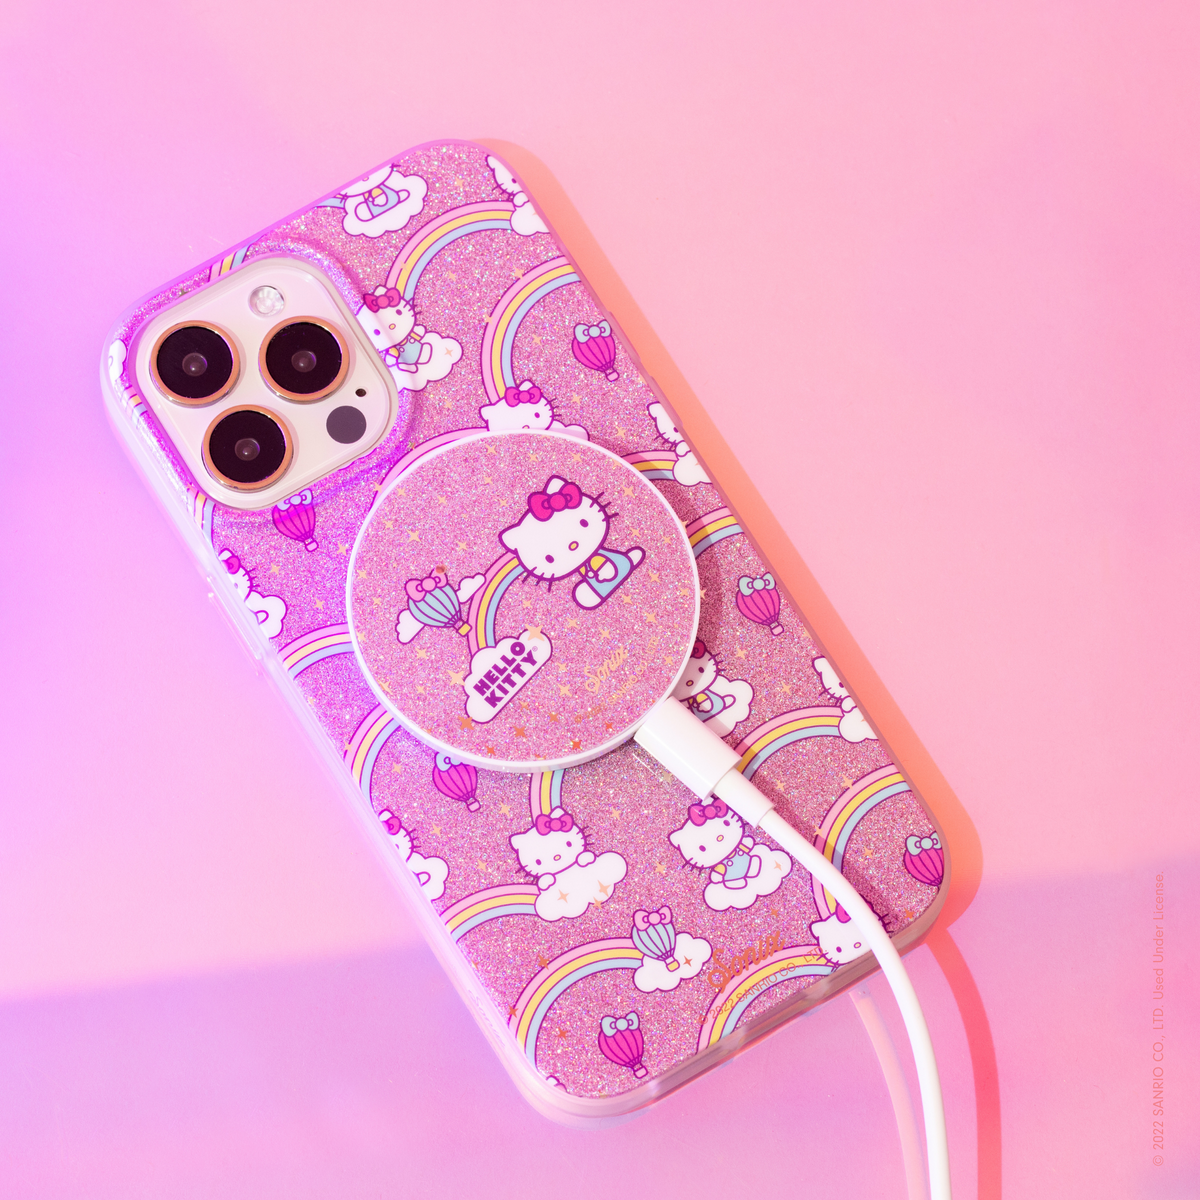 Sonix Apple iPhone 15/iPhone 14/ iPhone 13 Hello Kitty Case with MagSafe - Hello Kitty and Friends Snapshots